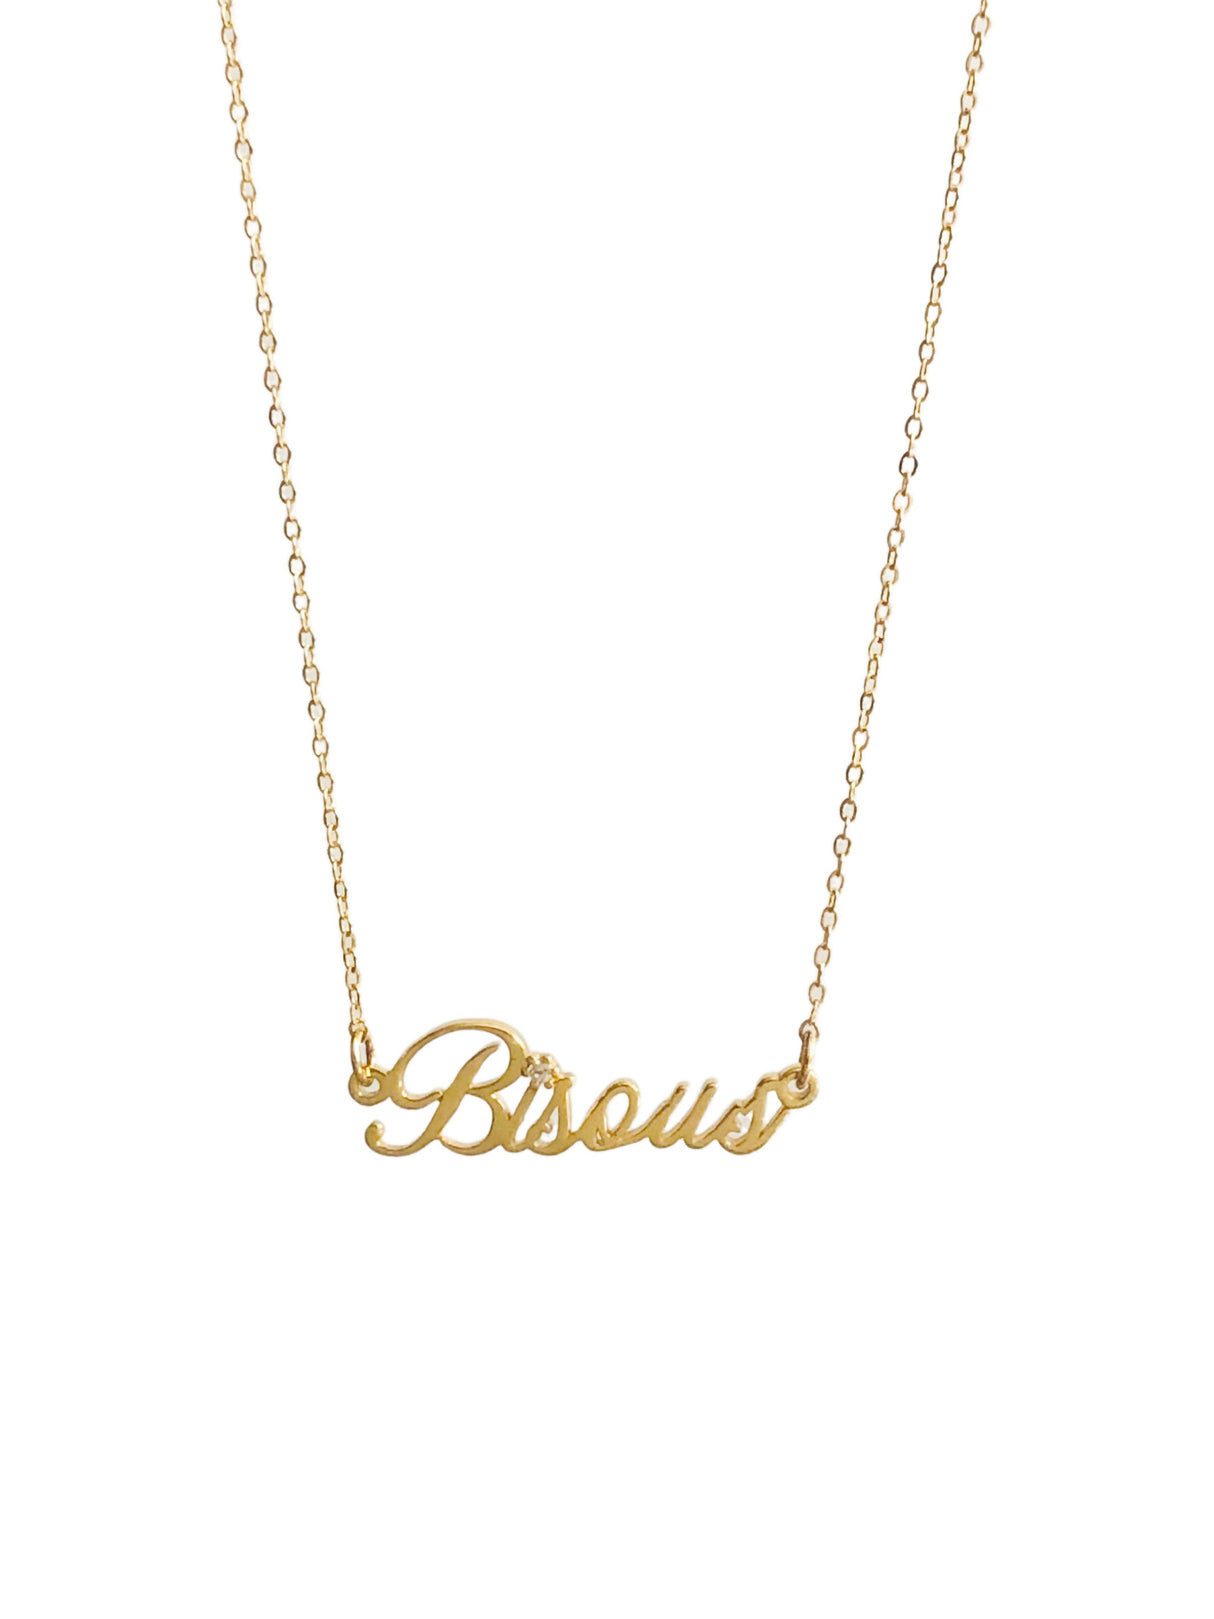 Bisous Necklace